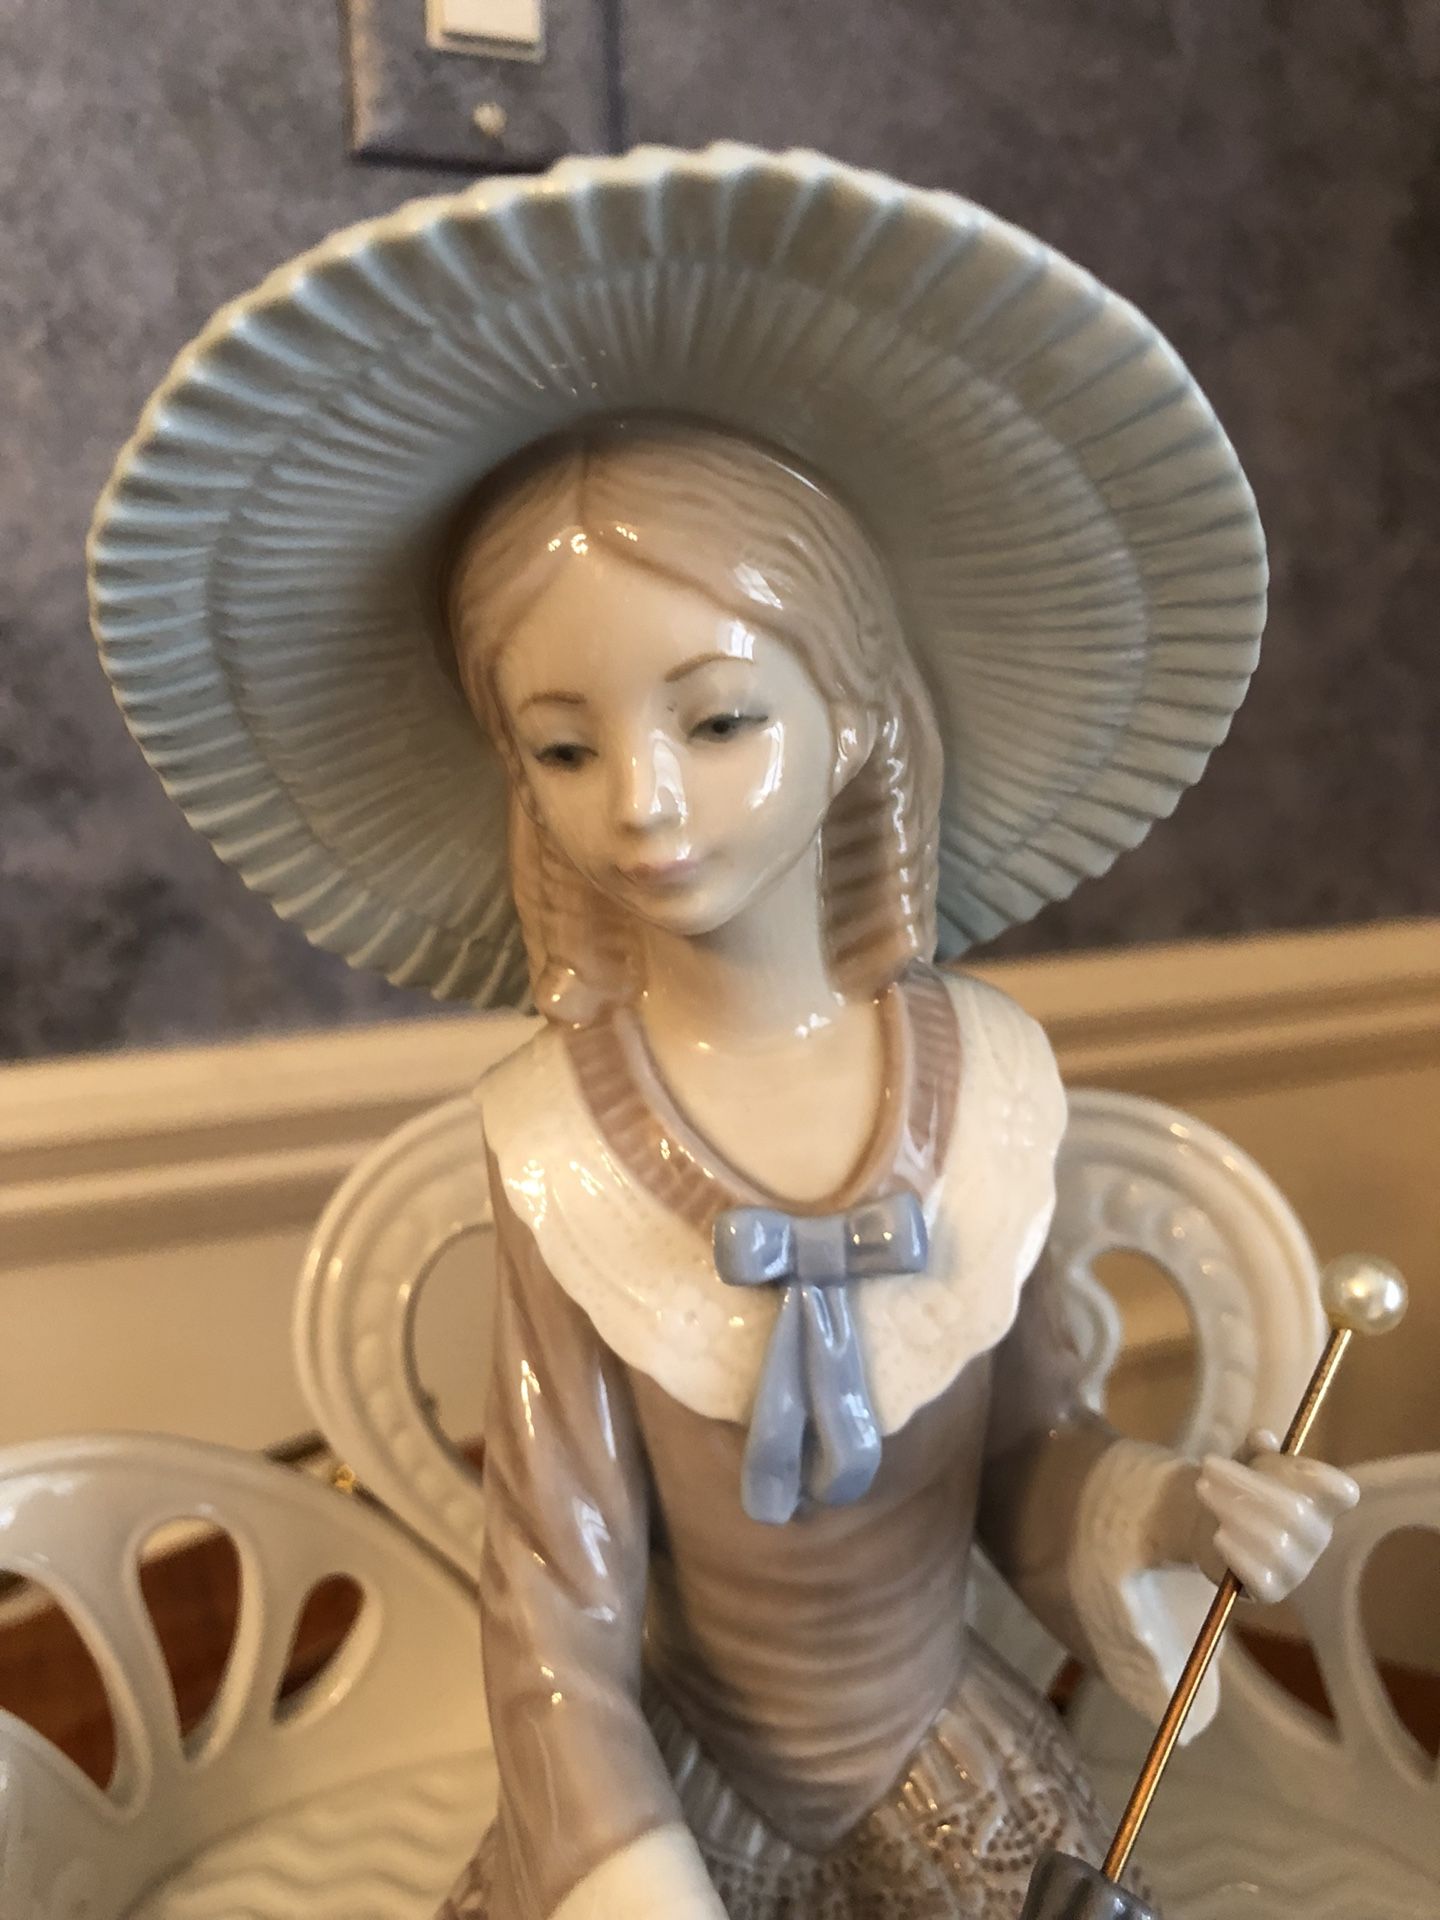 Lladro figurine “Waiting in the Park”